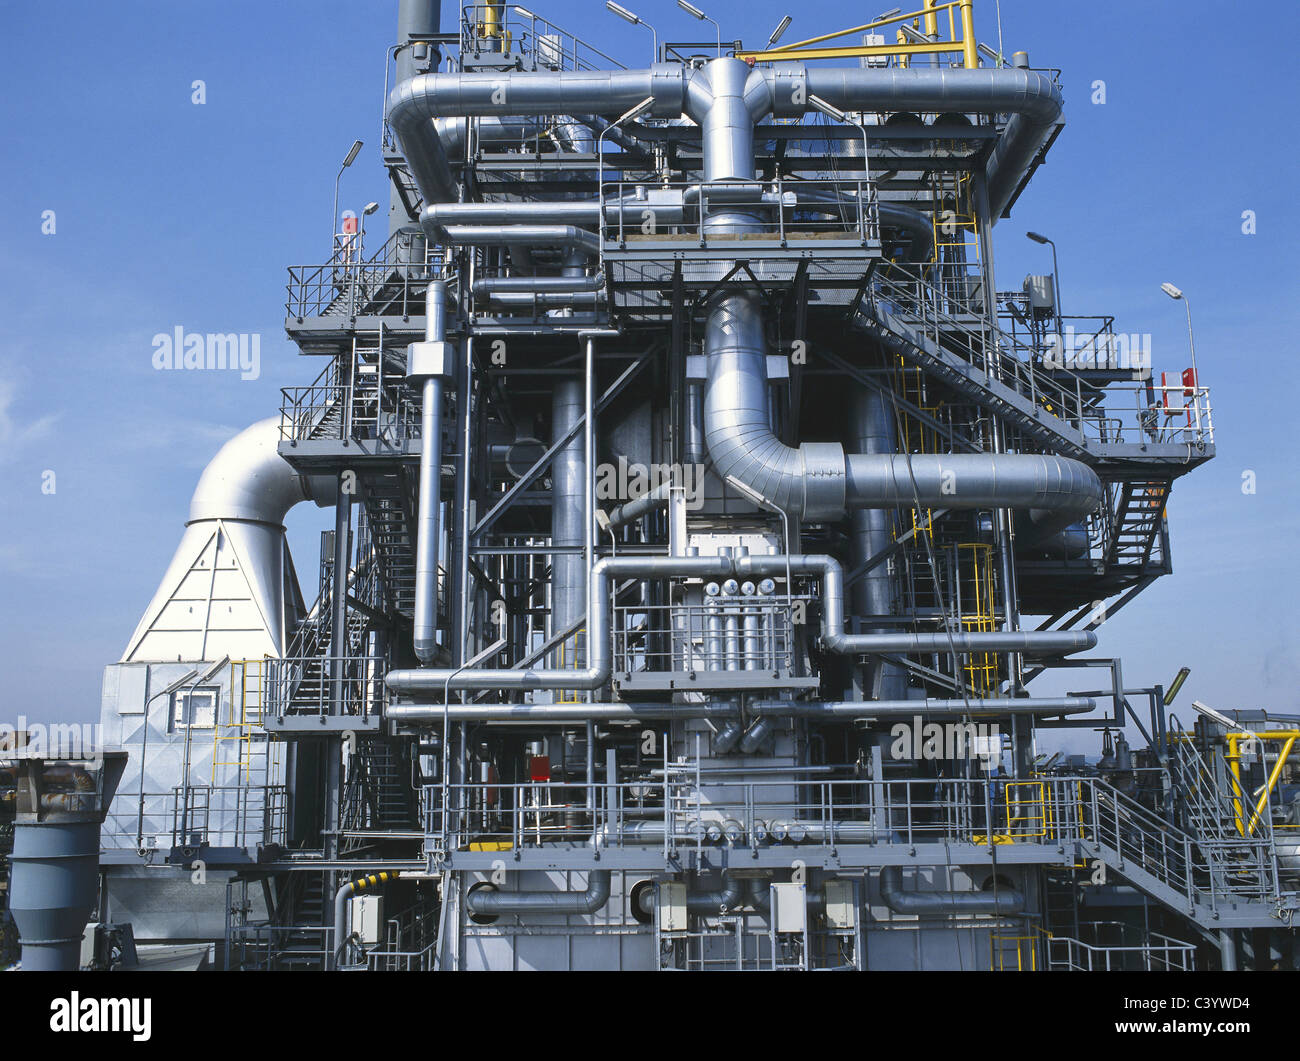 Architecture, Building, Chemical, Chemistry, Complex, Complexity, Cracking, Cracking Installation, Economy, Europe, Facility, Fa Stock Photo